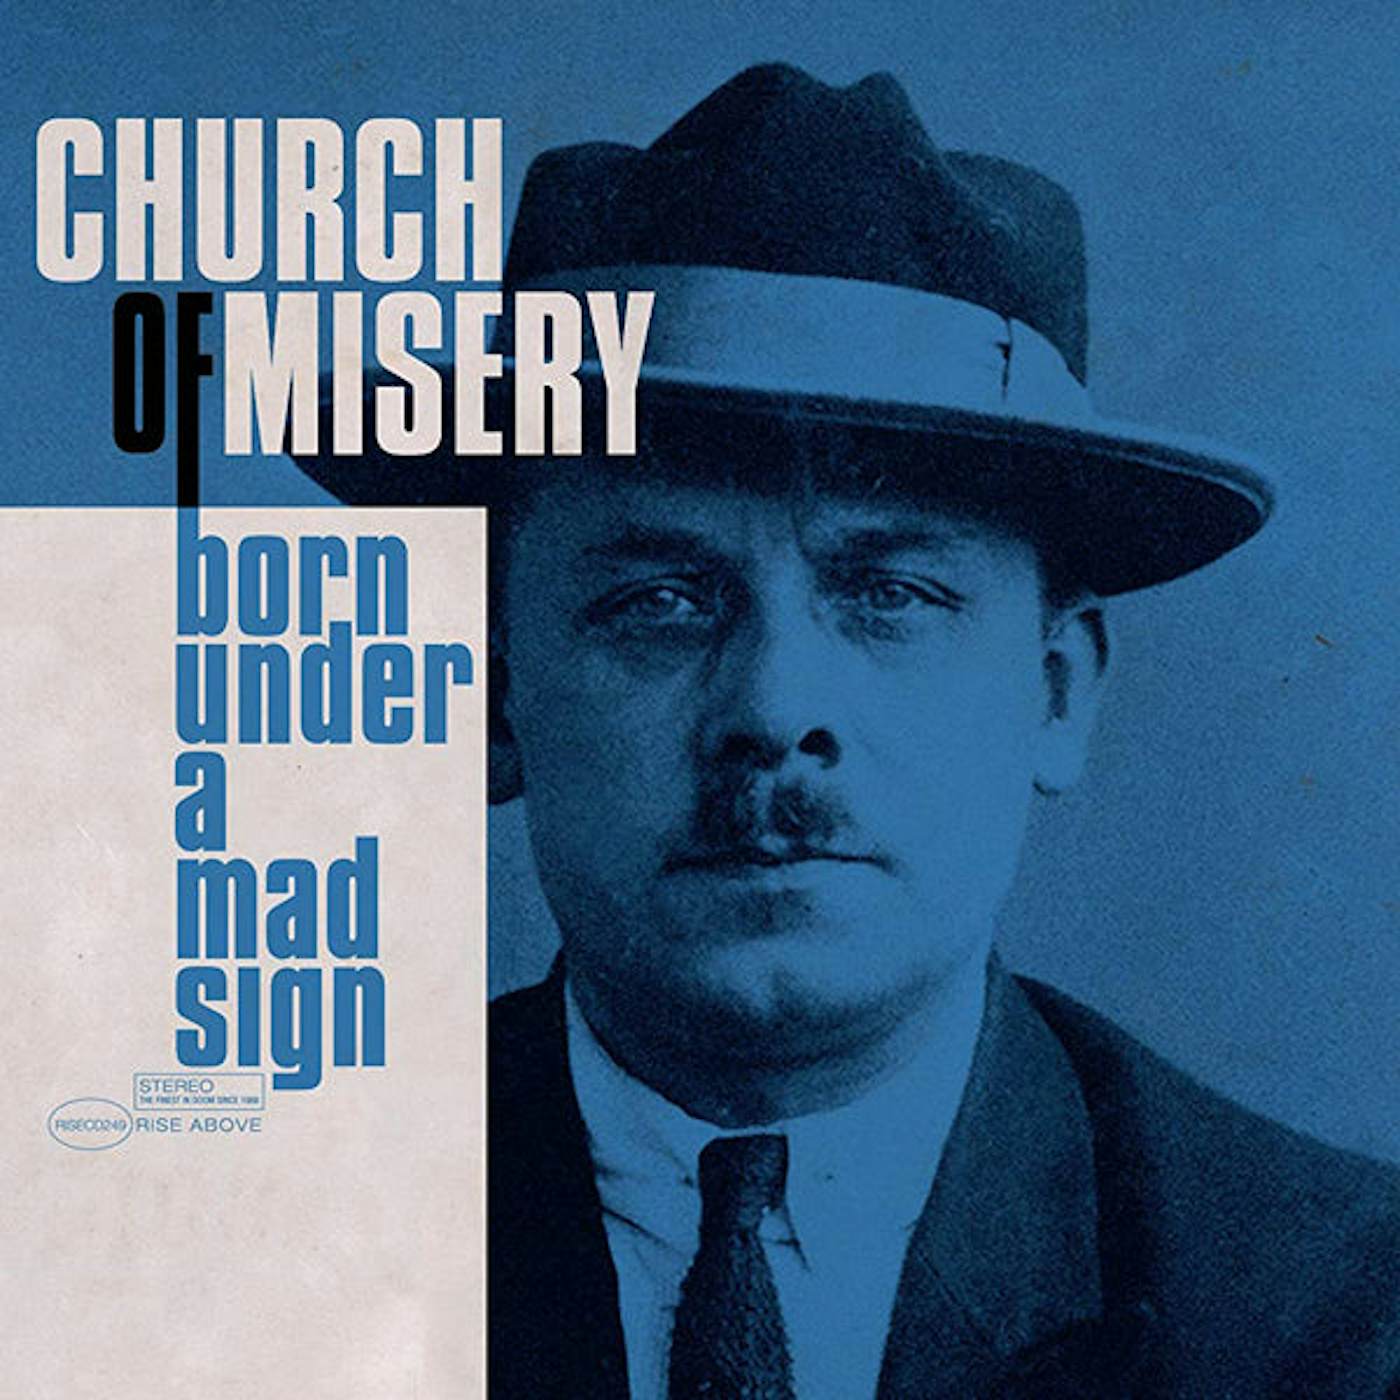 Church Of Misery BORN UNDER A MAD SIGN Vinyl Record